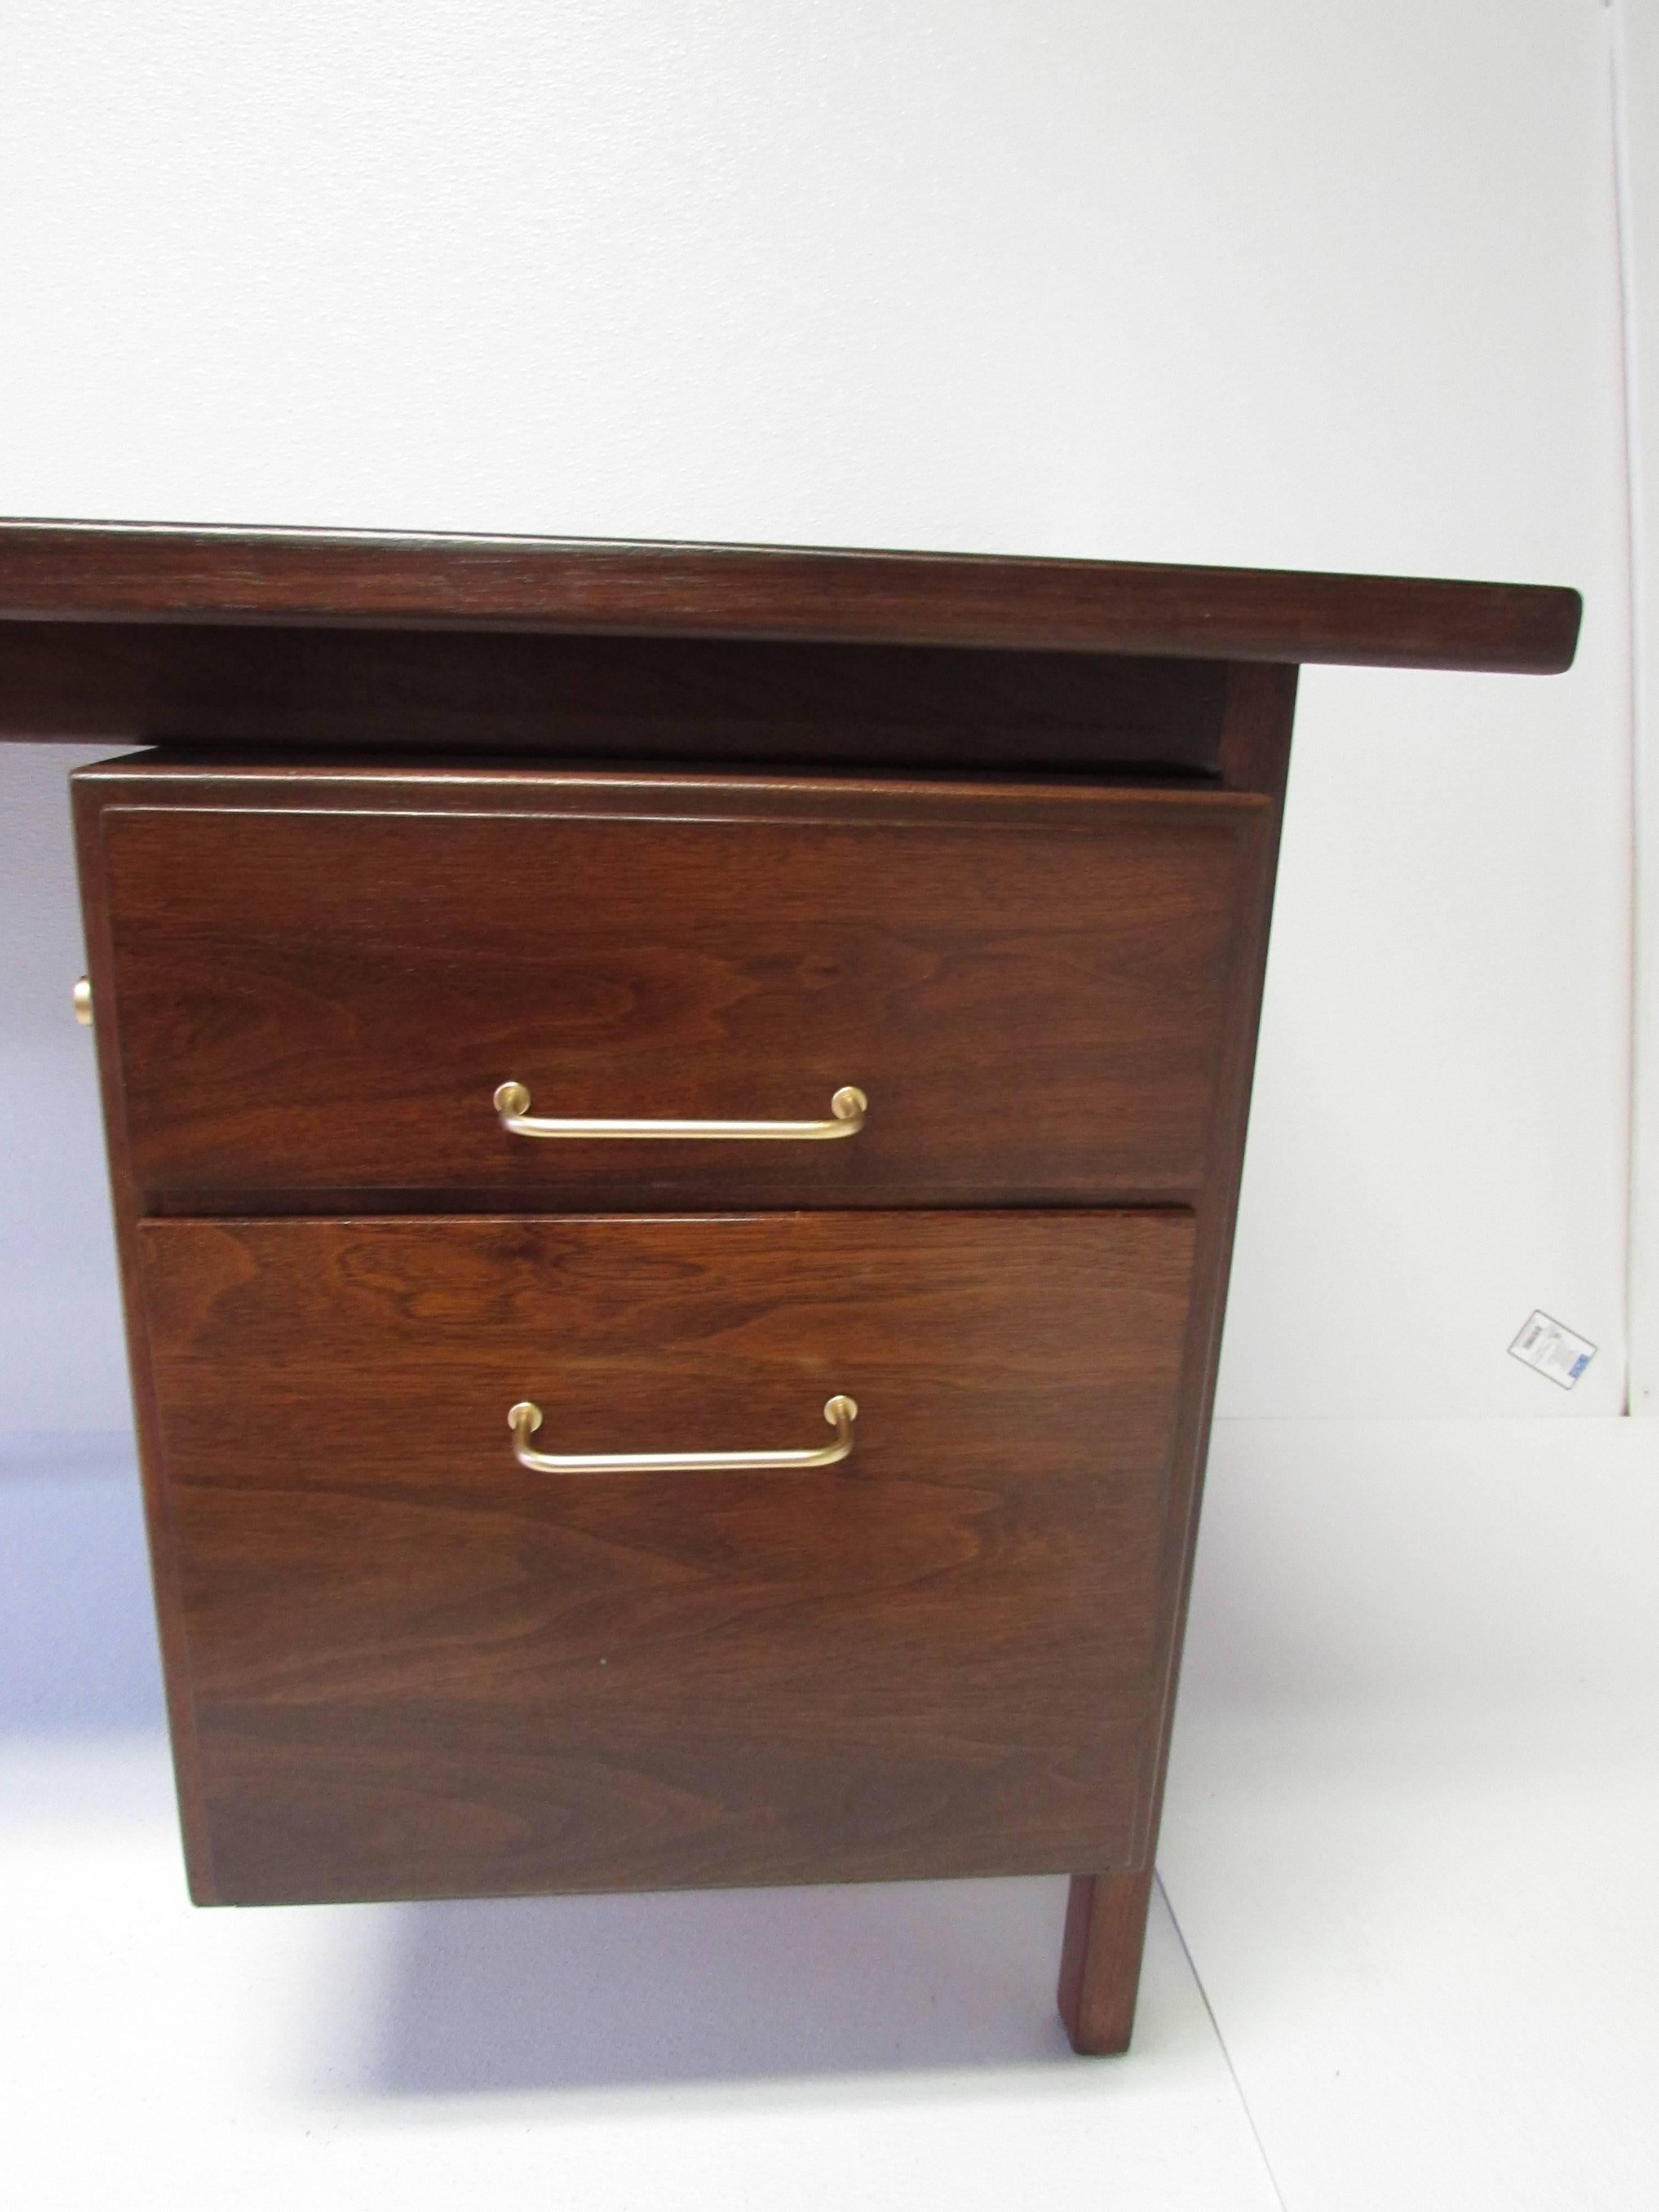 Executive Desk Attributed to Jens Risom In Excellent Condition For Sale In Raleigh, NC